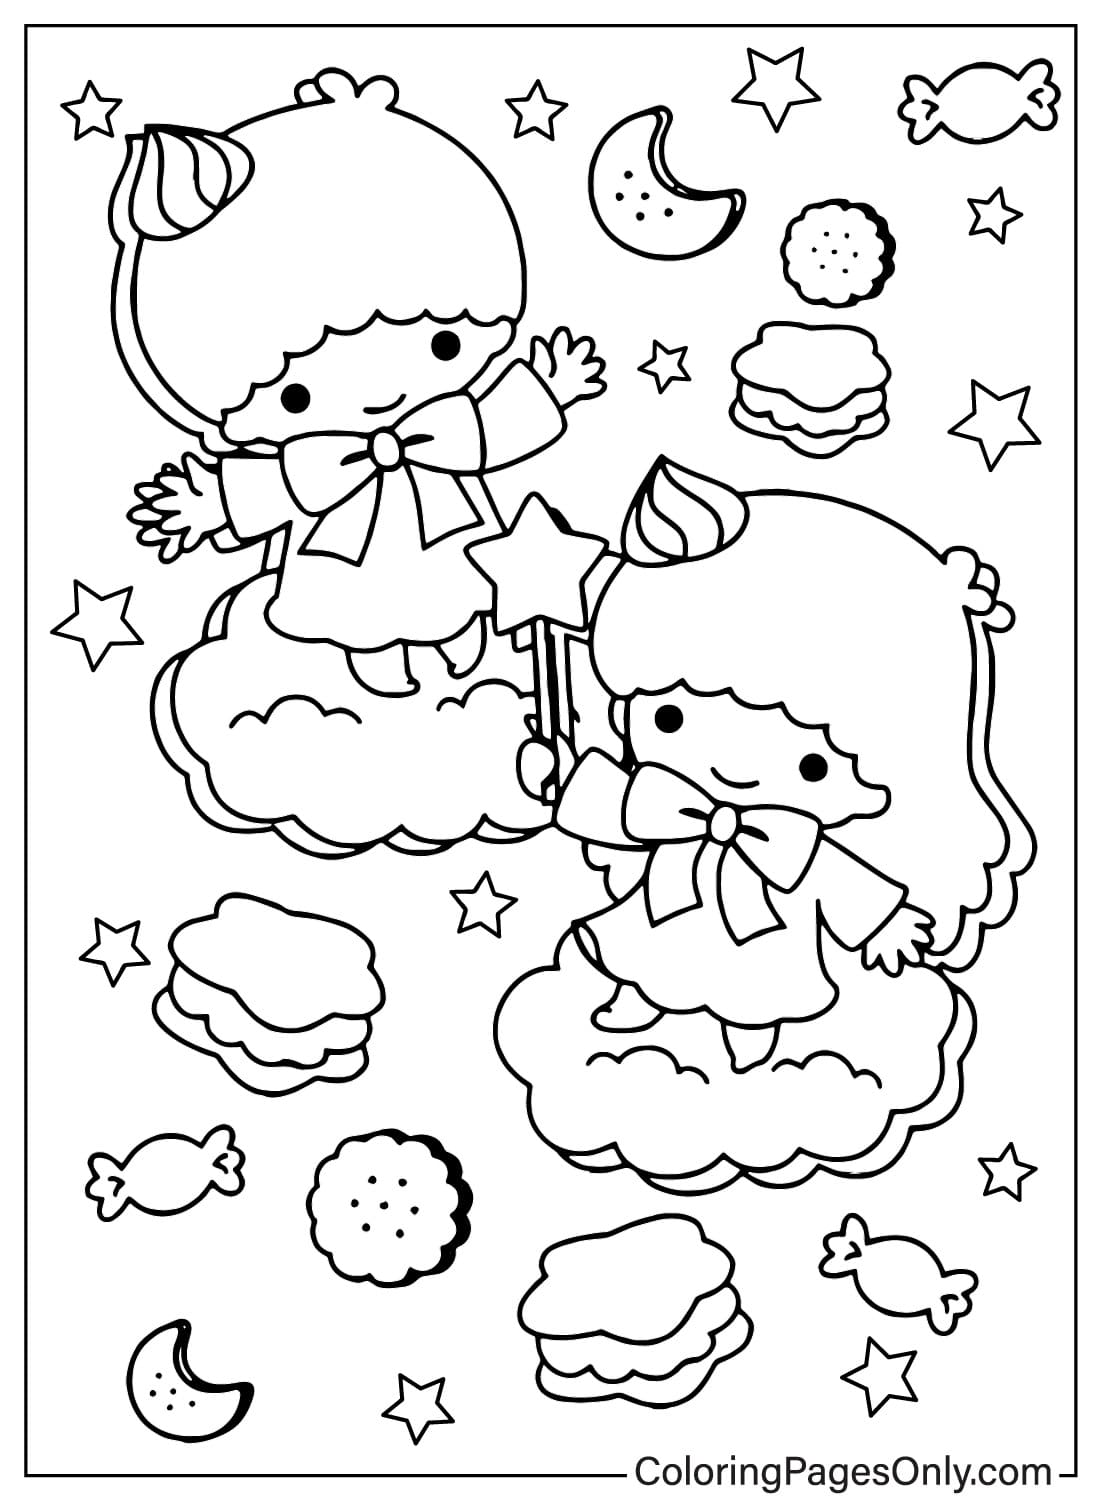 Lala and Kiki Coloring Page from Little Twin Stars